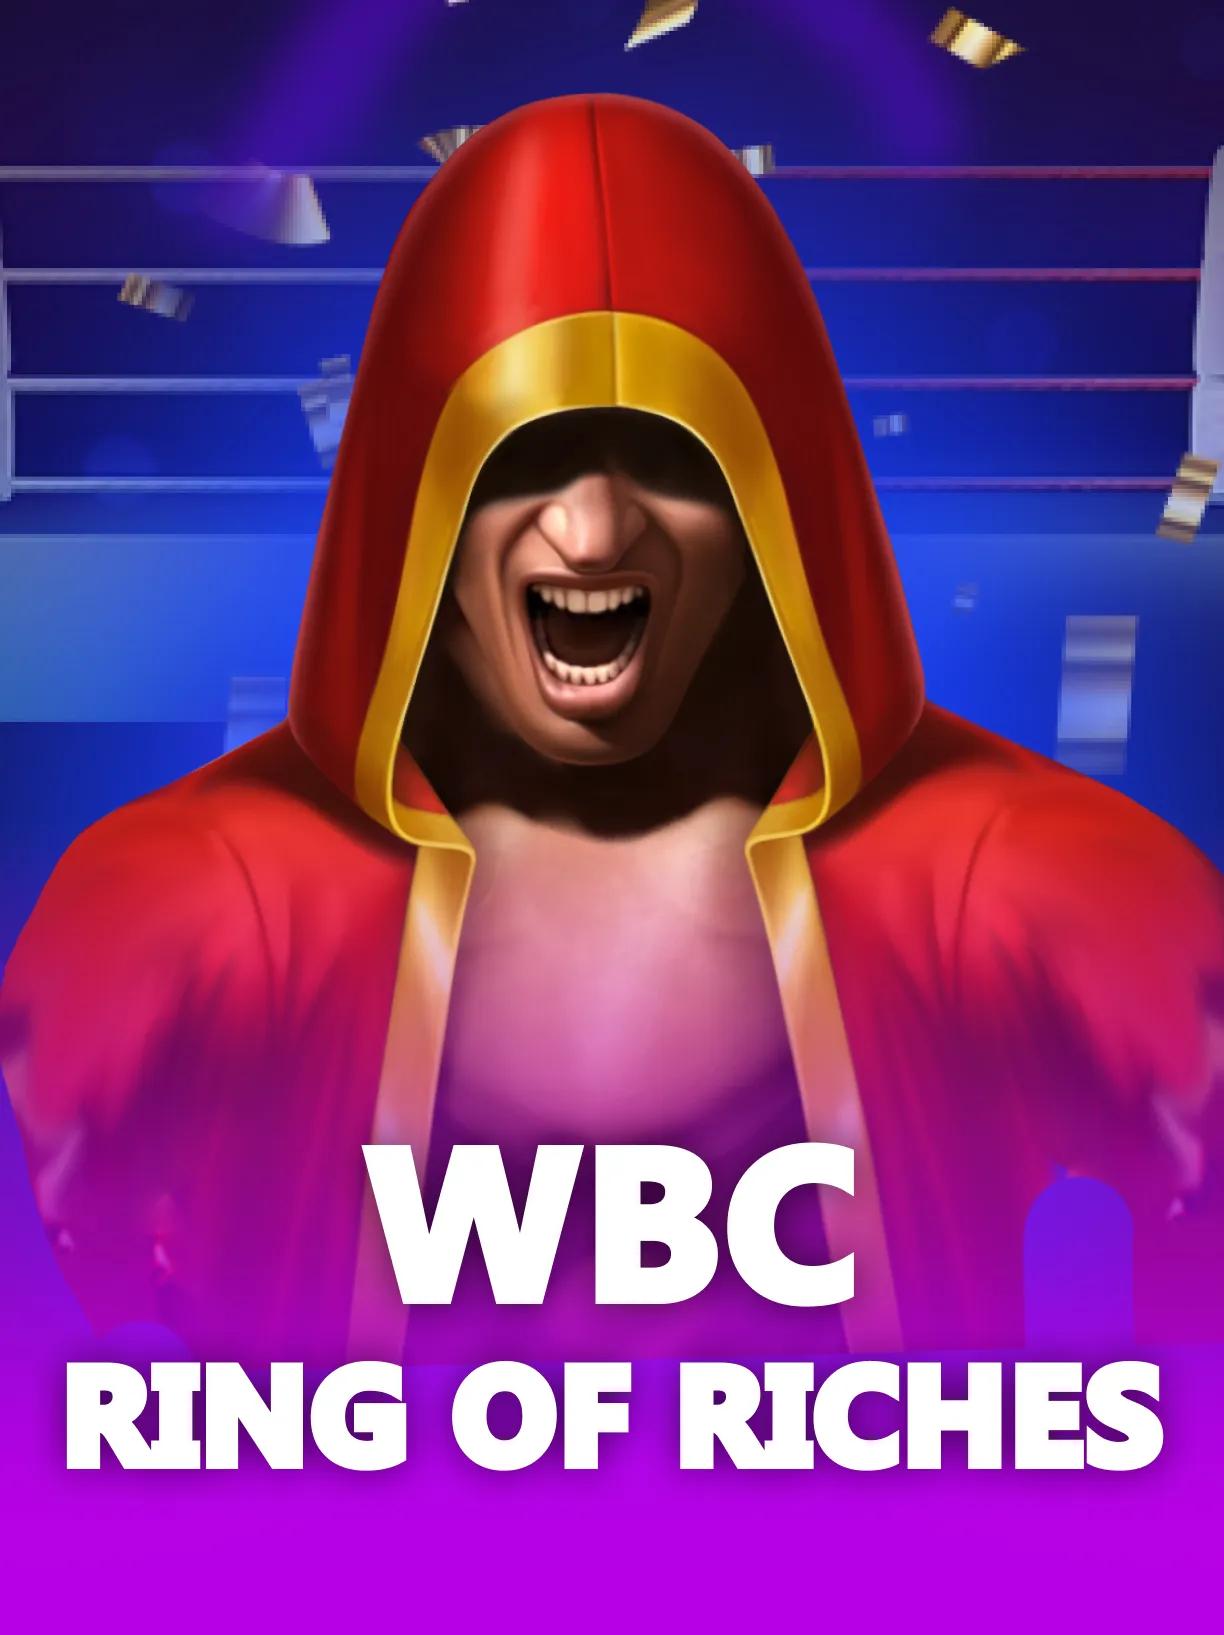 WBC_Ring_Of_Riches_square.webp